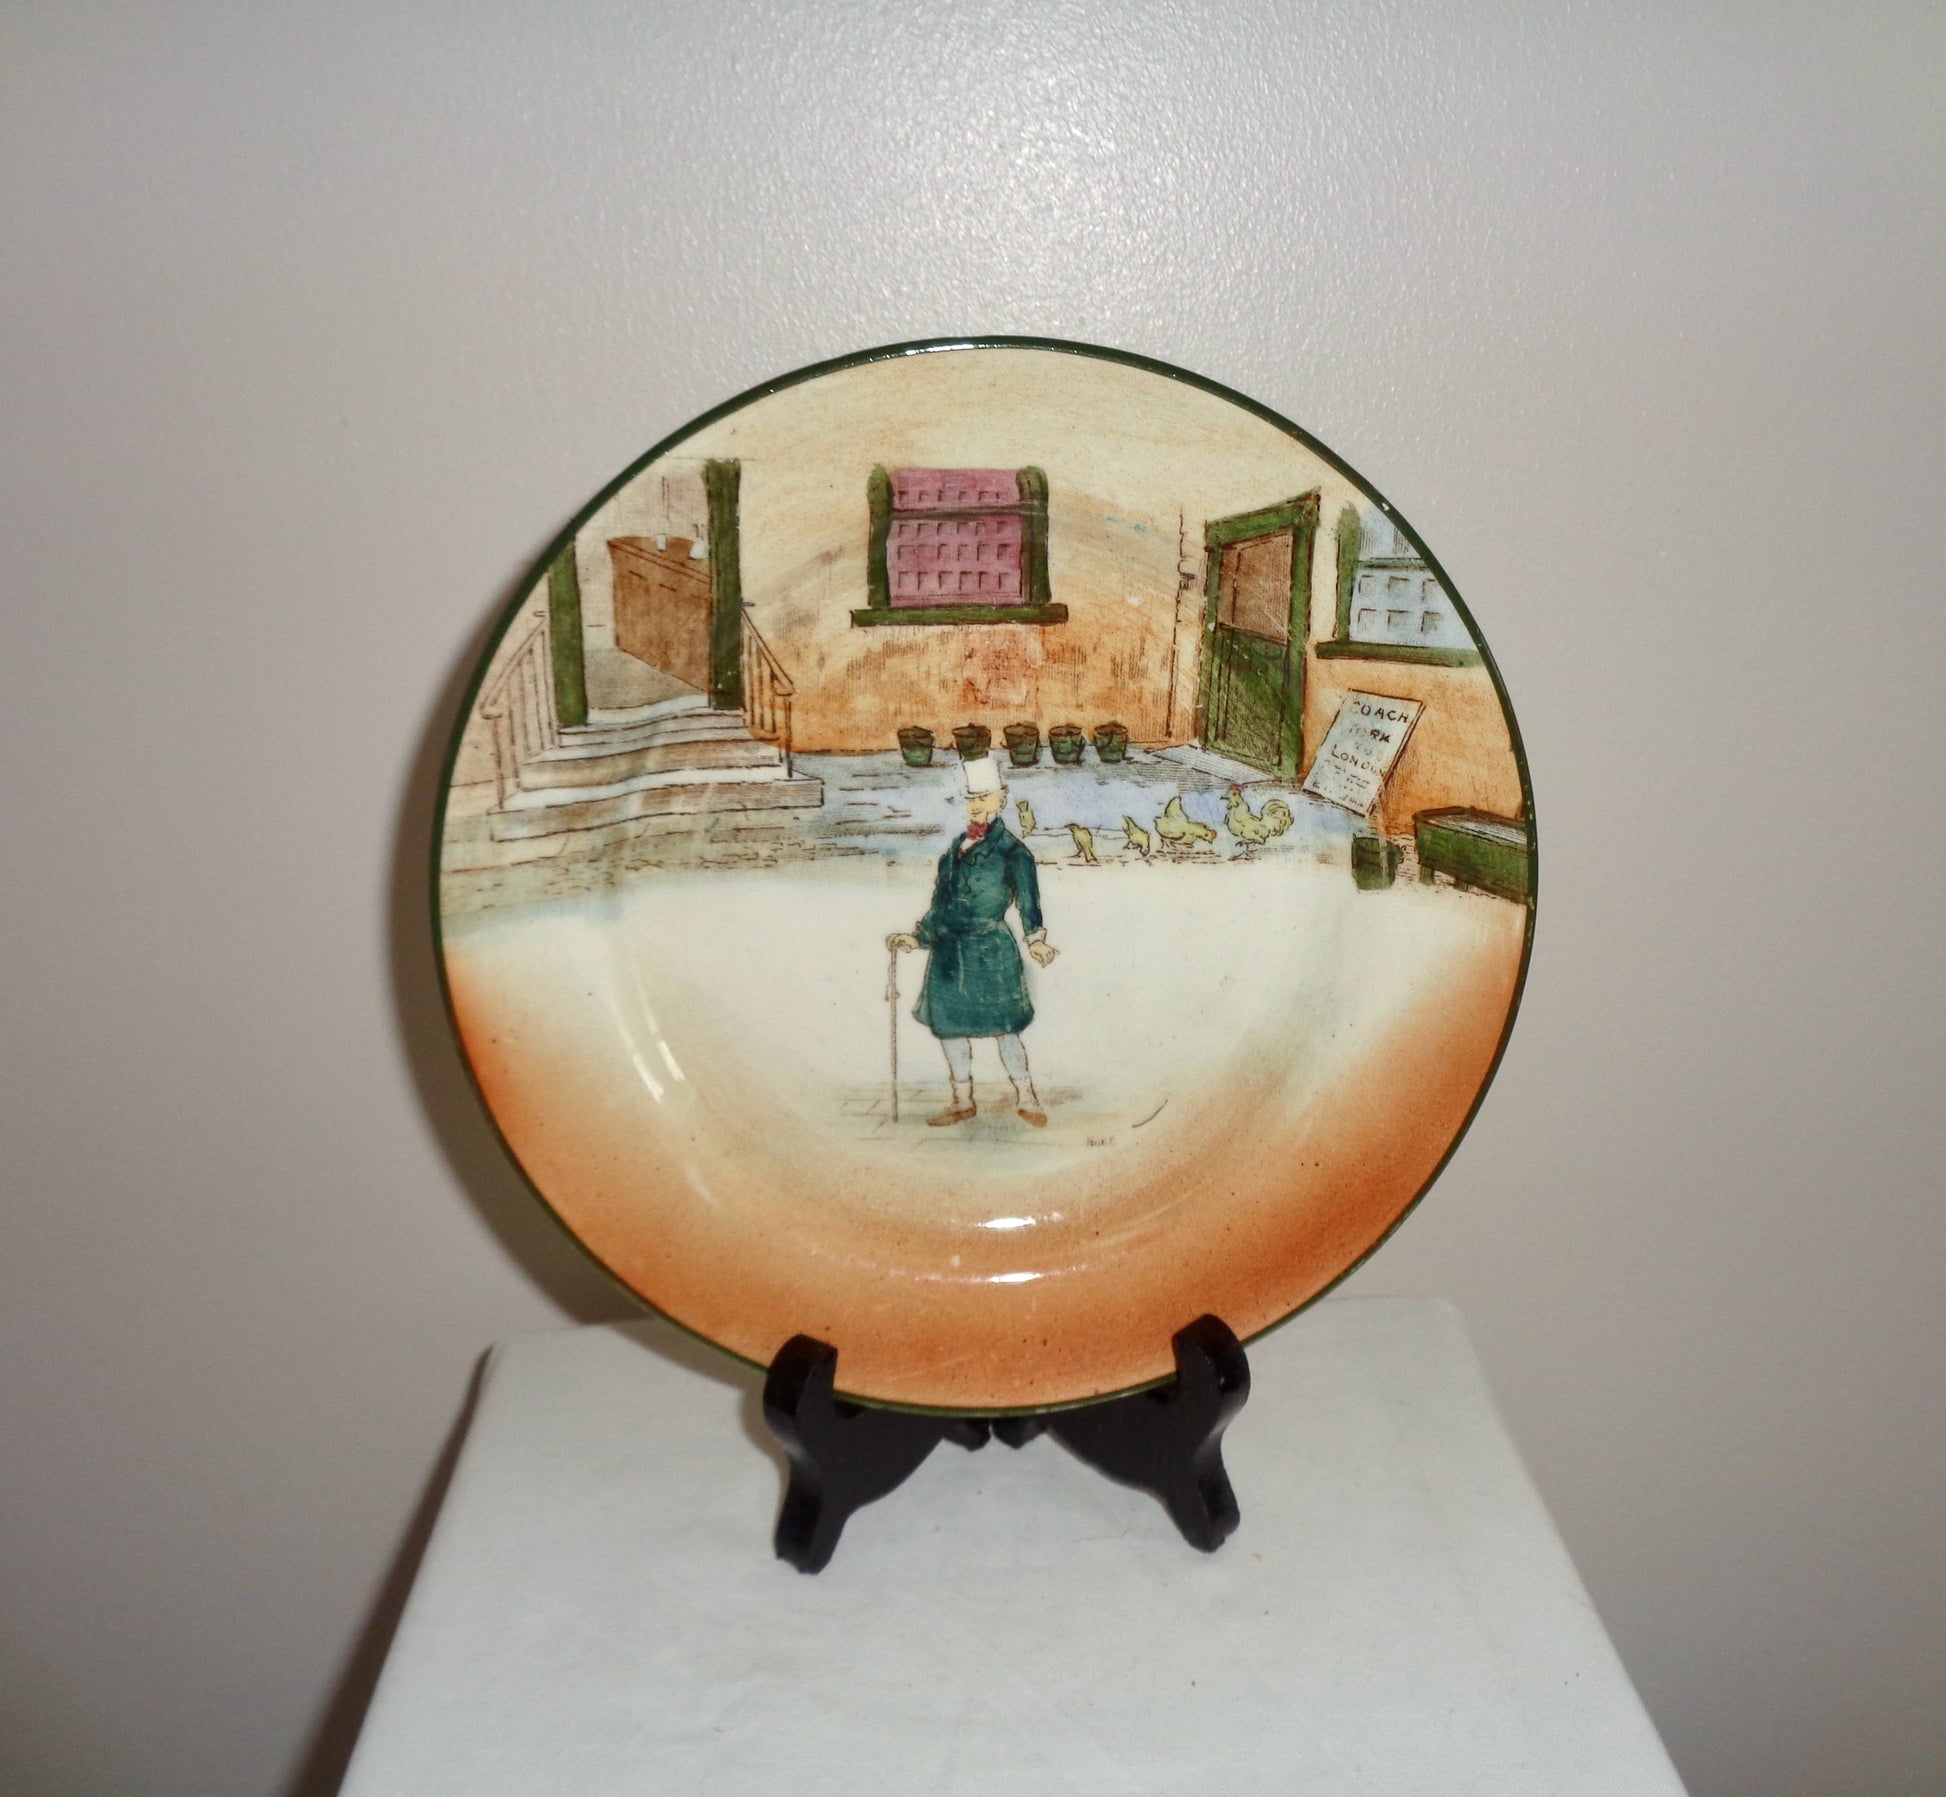 1930s Royal Doulton Dickens Ware Mr Micawber 6.5 Inch Side Plate. Pattern Number D2973